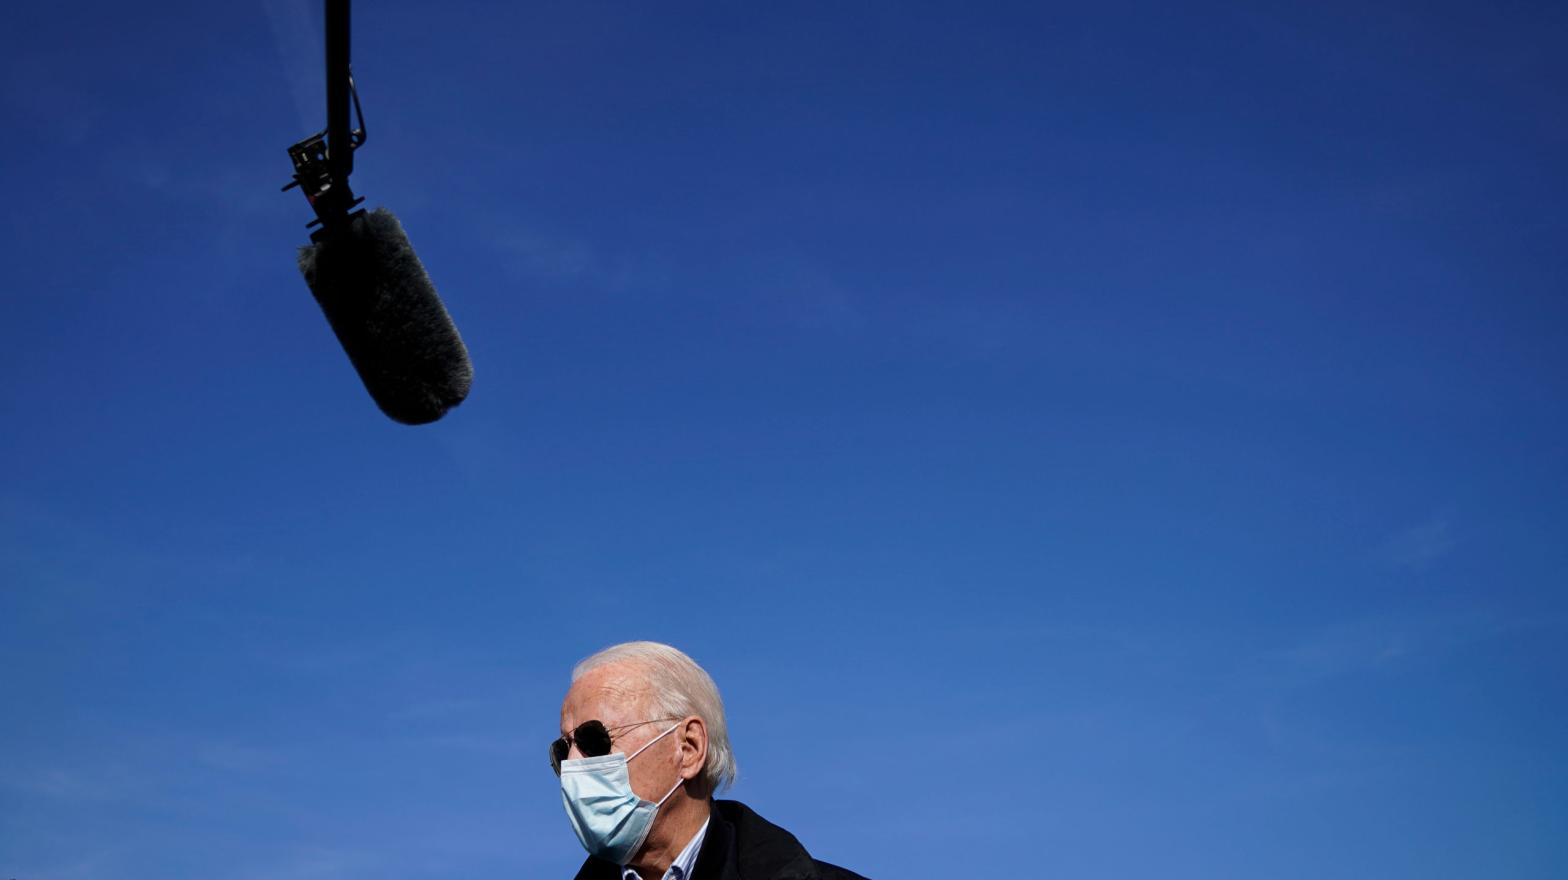 President-elect Joe Biden speaks to reporters before boarding his plane at New Castle Airport on Dec. 15, 2020. (Photo: Drew Angerer, Getty Images)